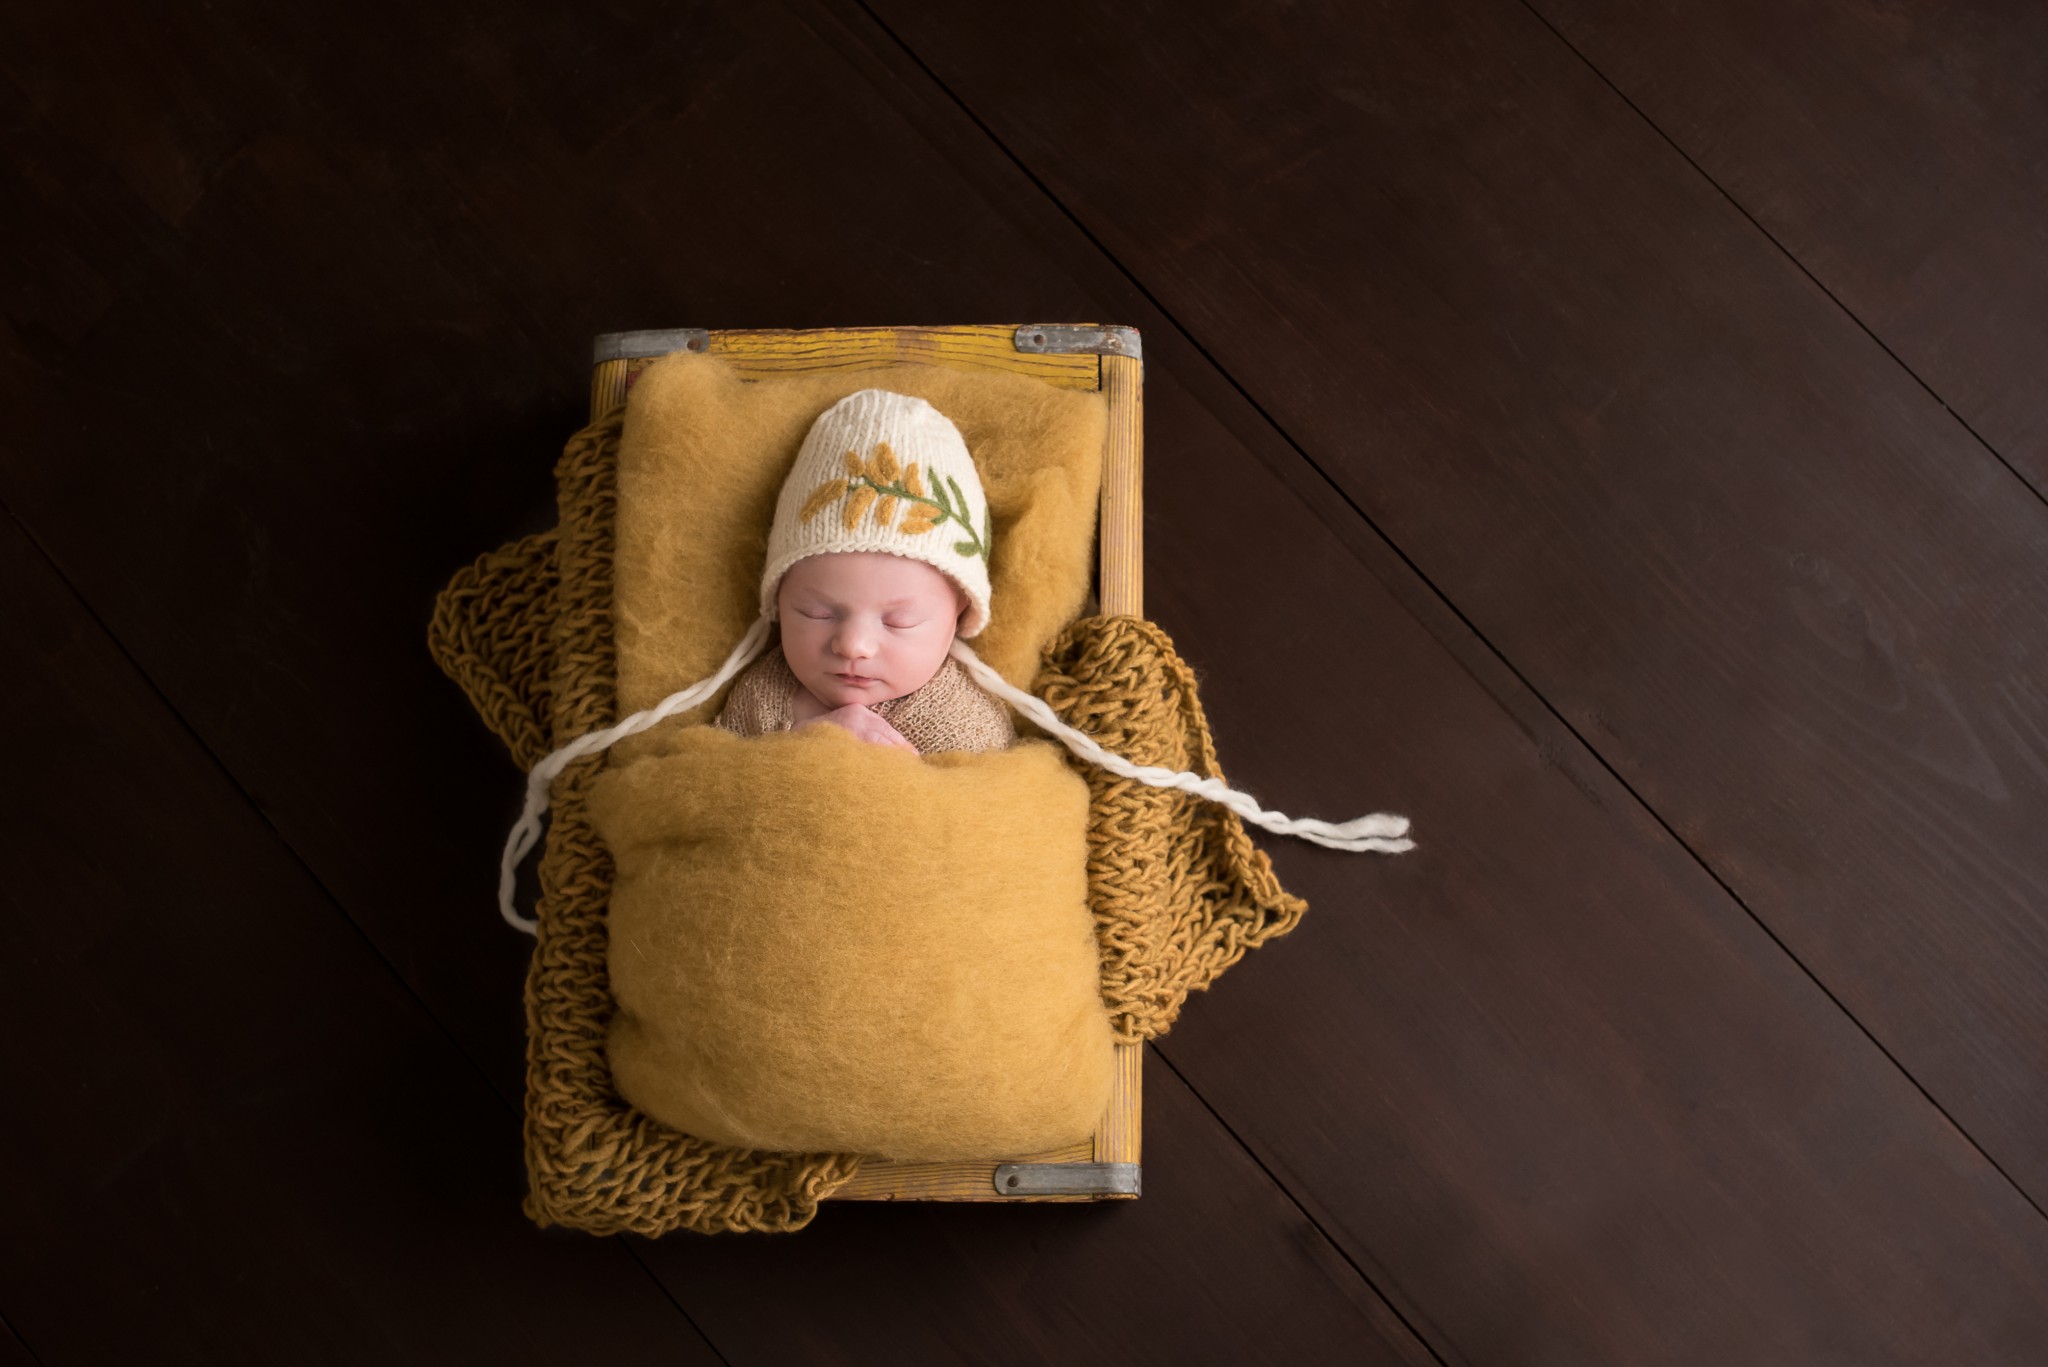 A baby girl rests in mustard gold fabrics and knits in a vintage crate with a goldenrod bonnet during her Pittsburgh newborn photography session in Cranberry Twp PA